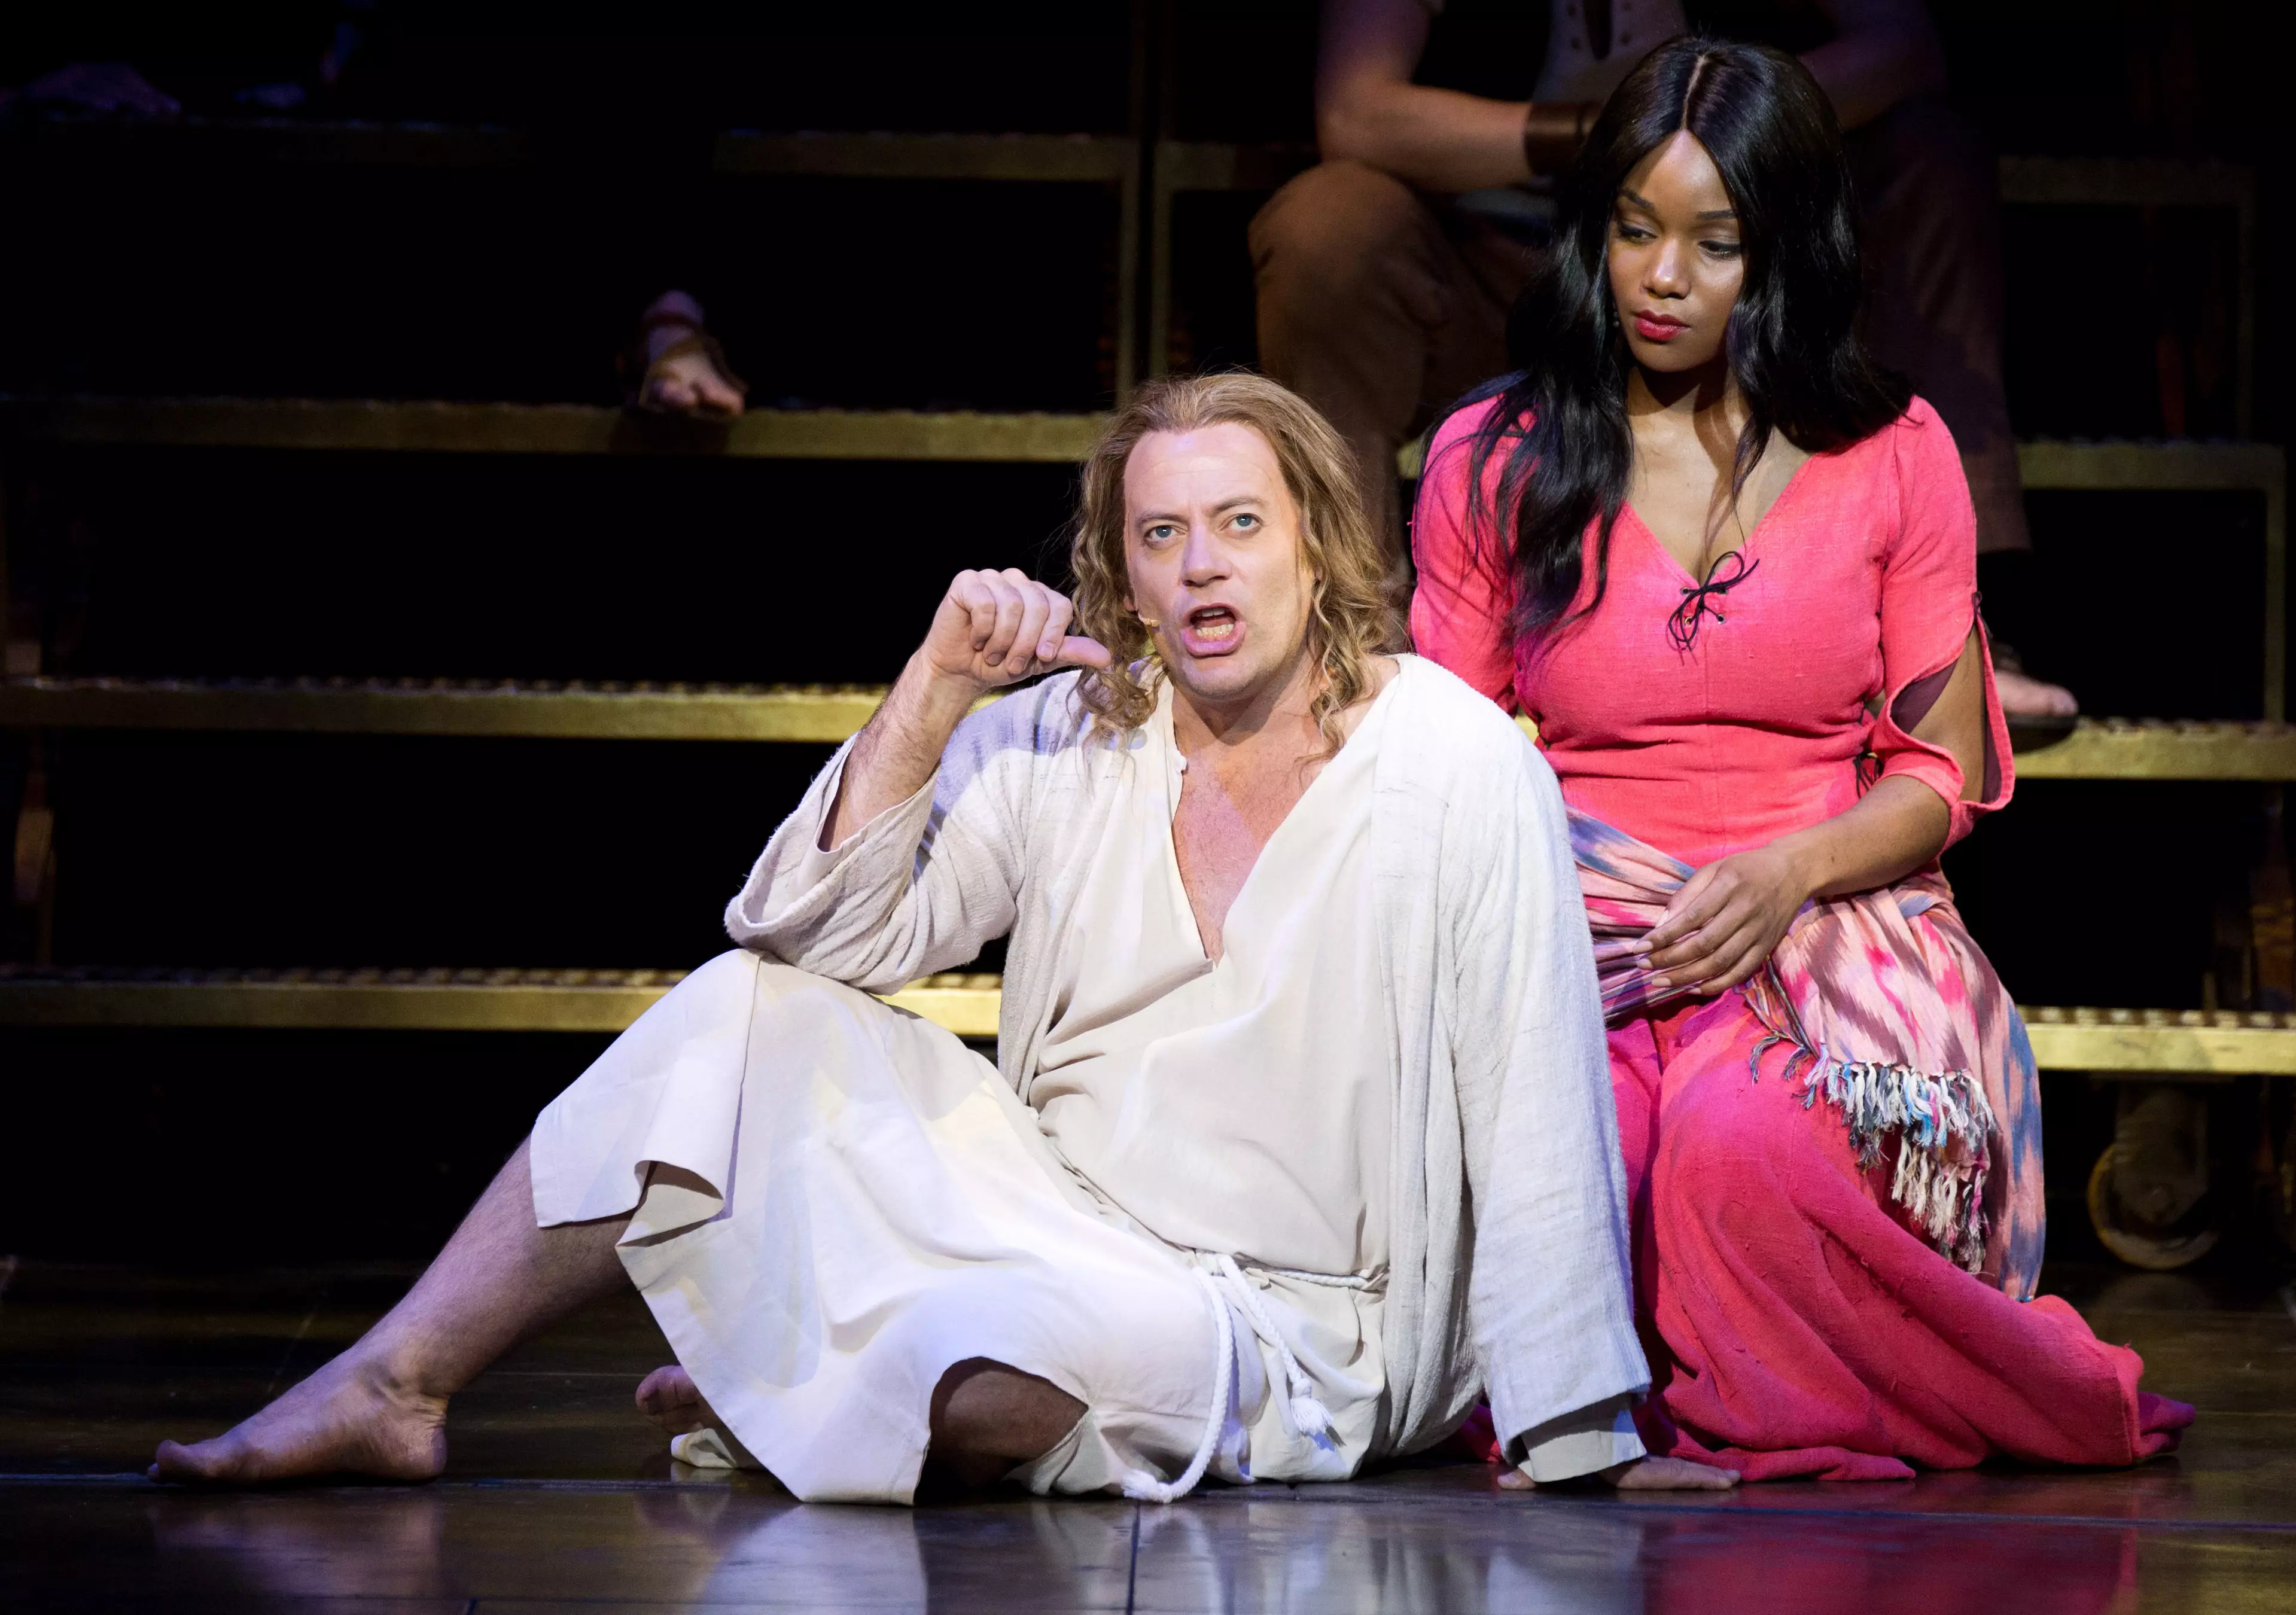 Jesus Christ Superstar will be the next show airing (